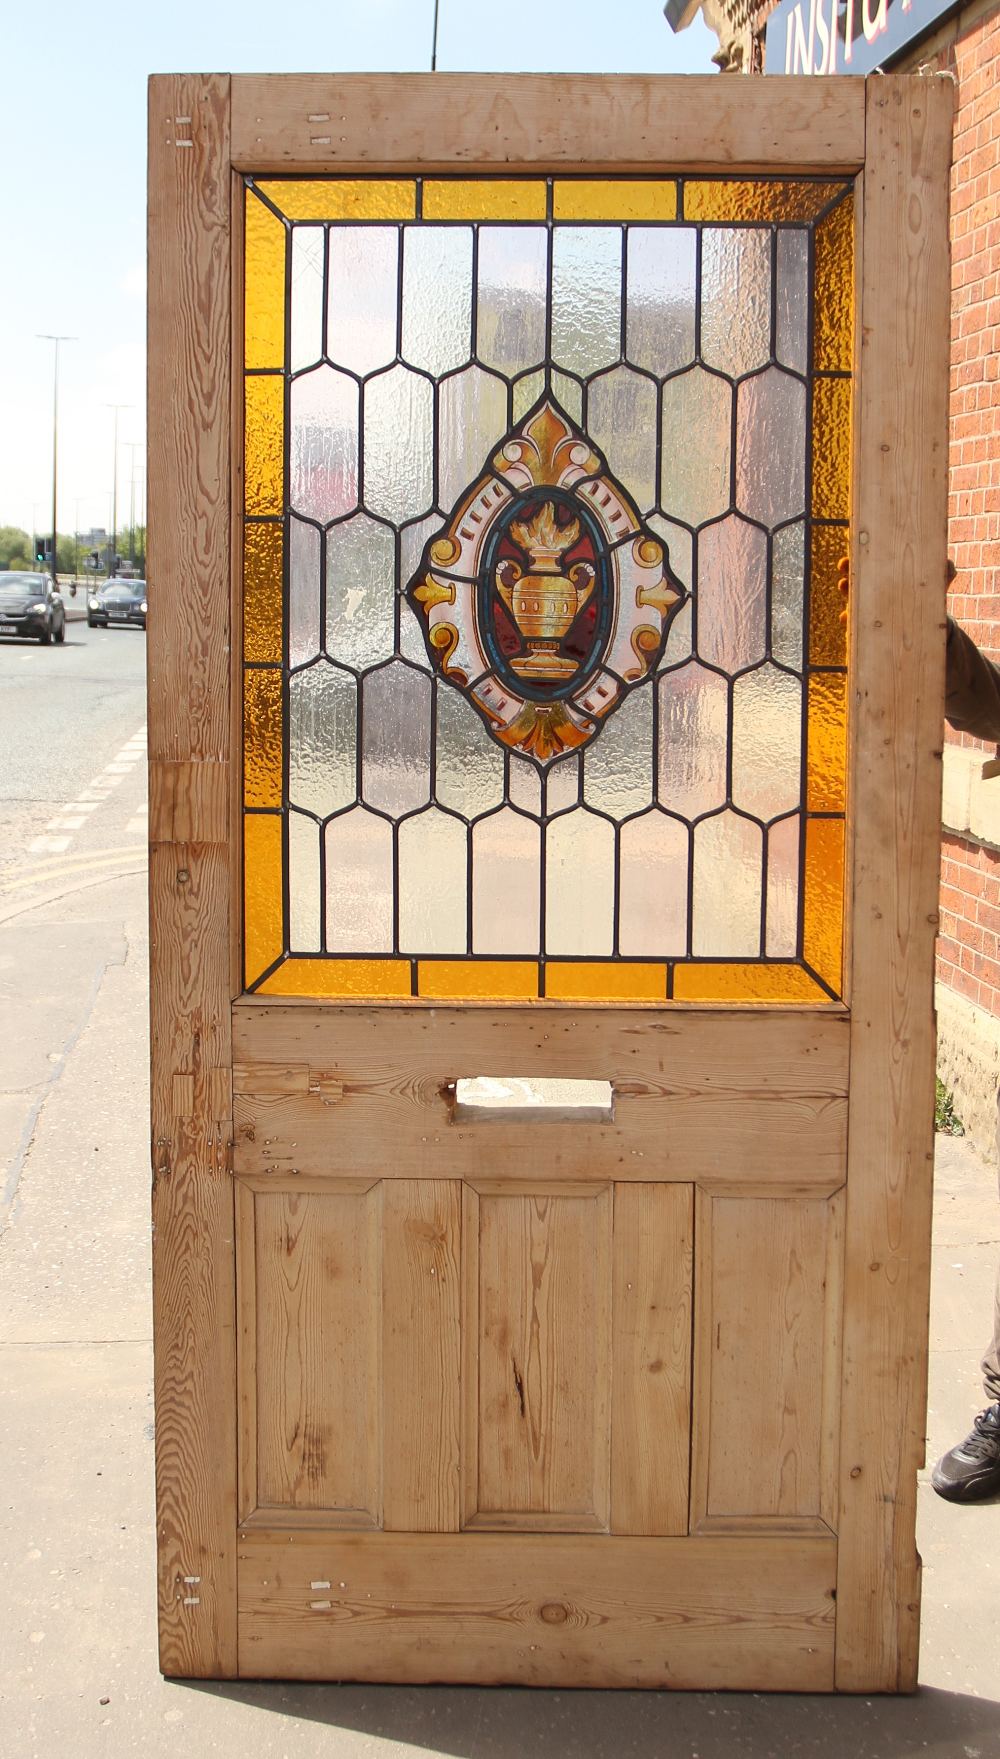 Gothic pine 1 over 3 leaded glass door with central urn stained glass design H: 226 W: 109 cm